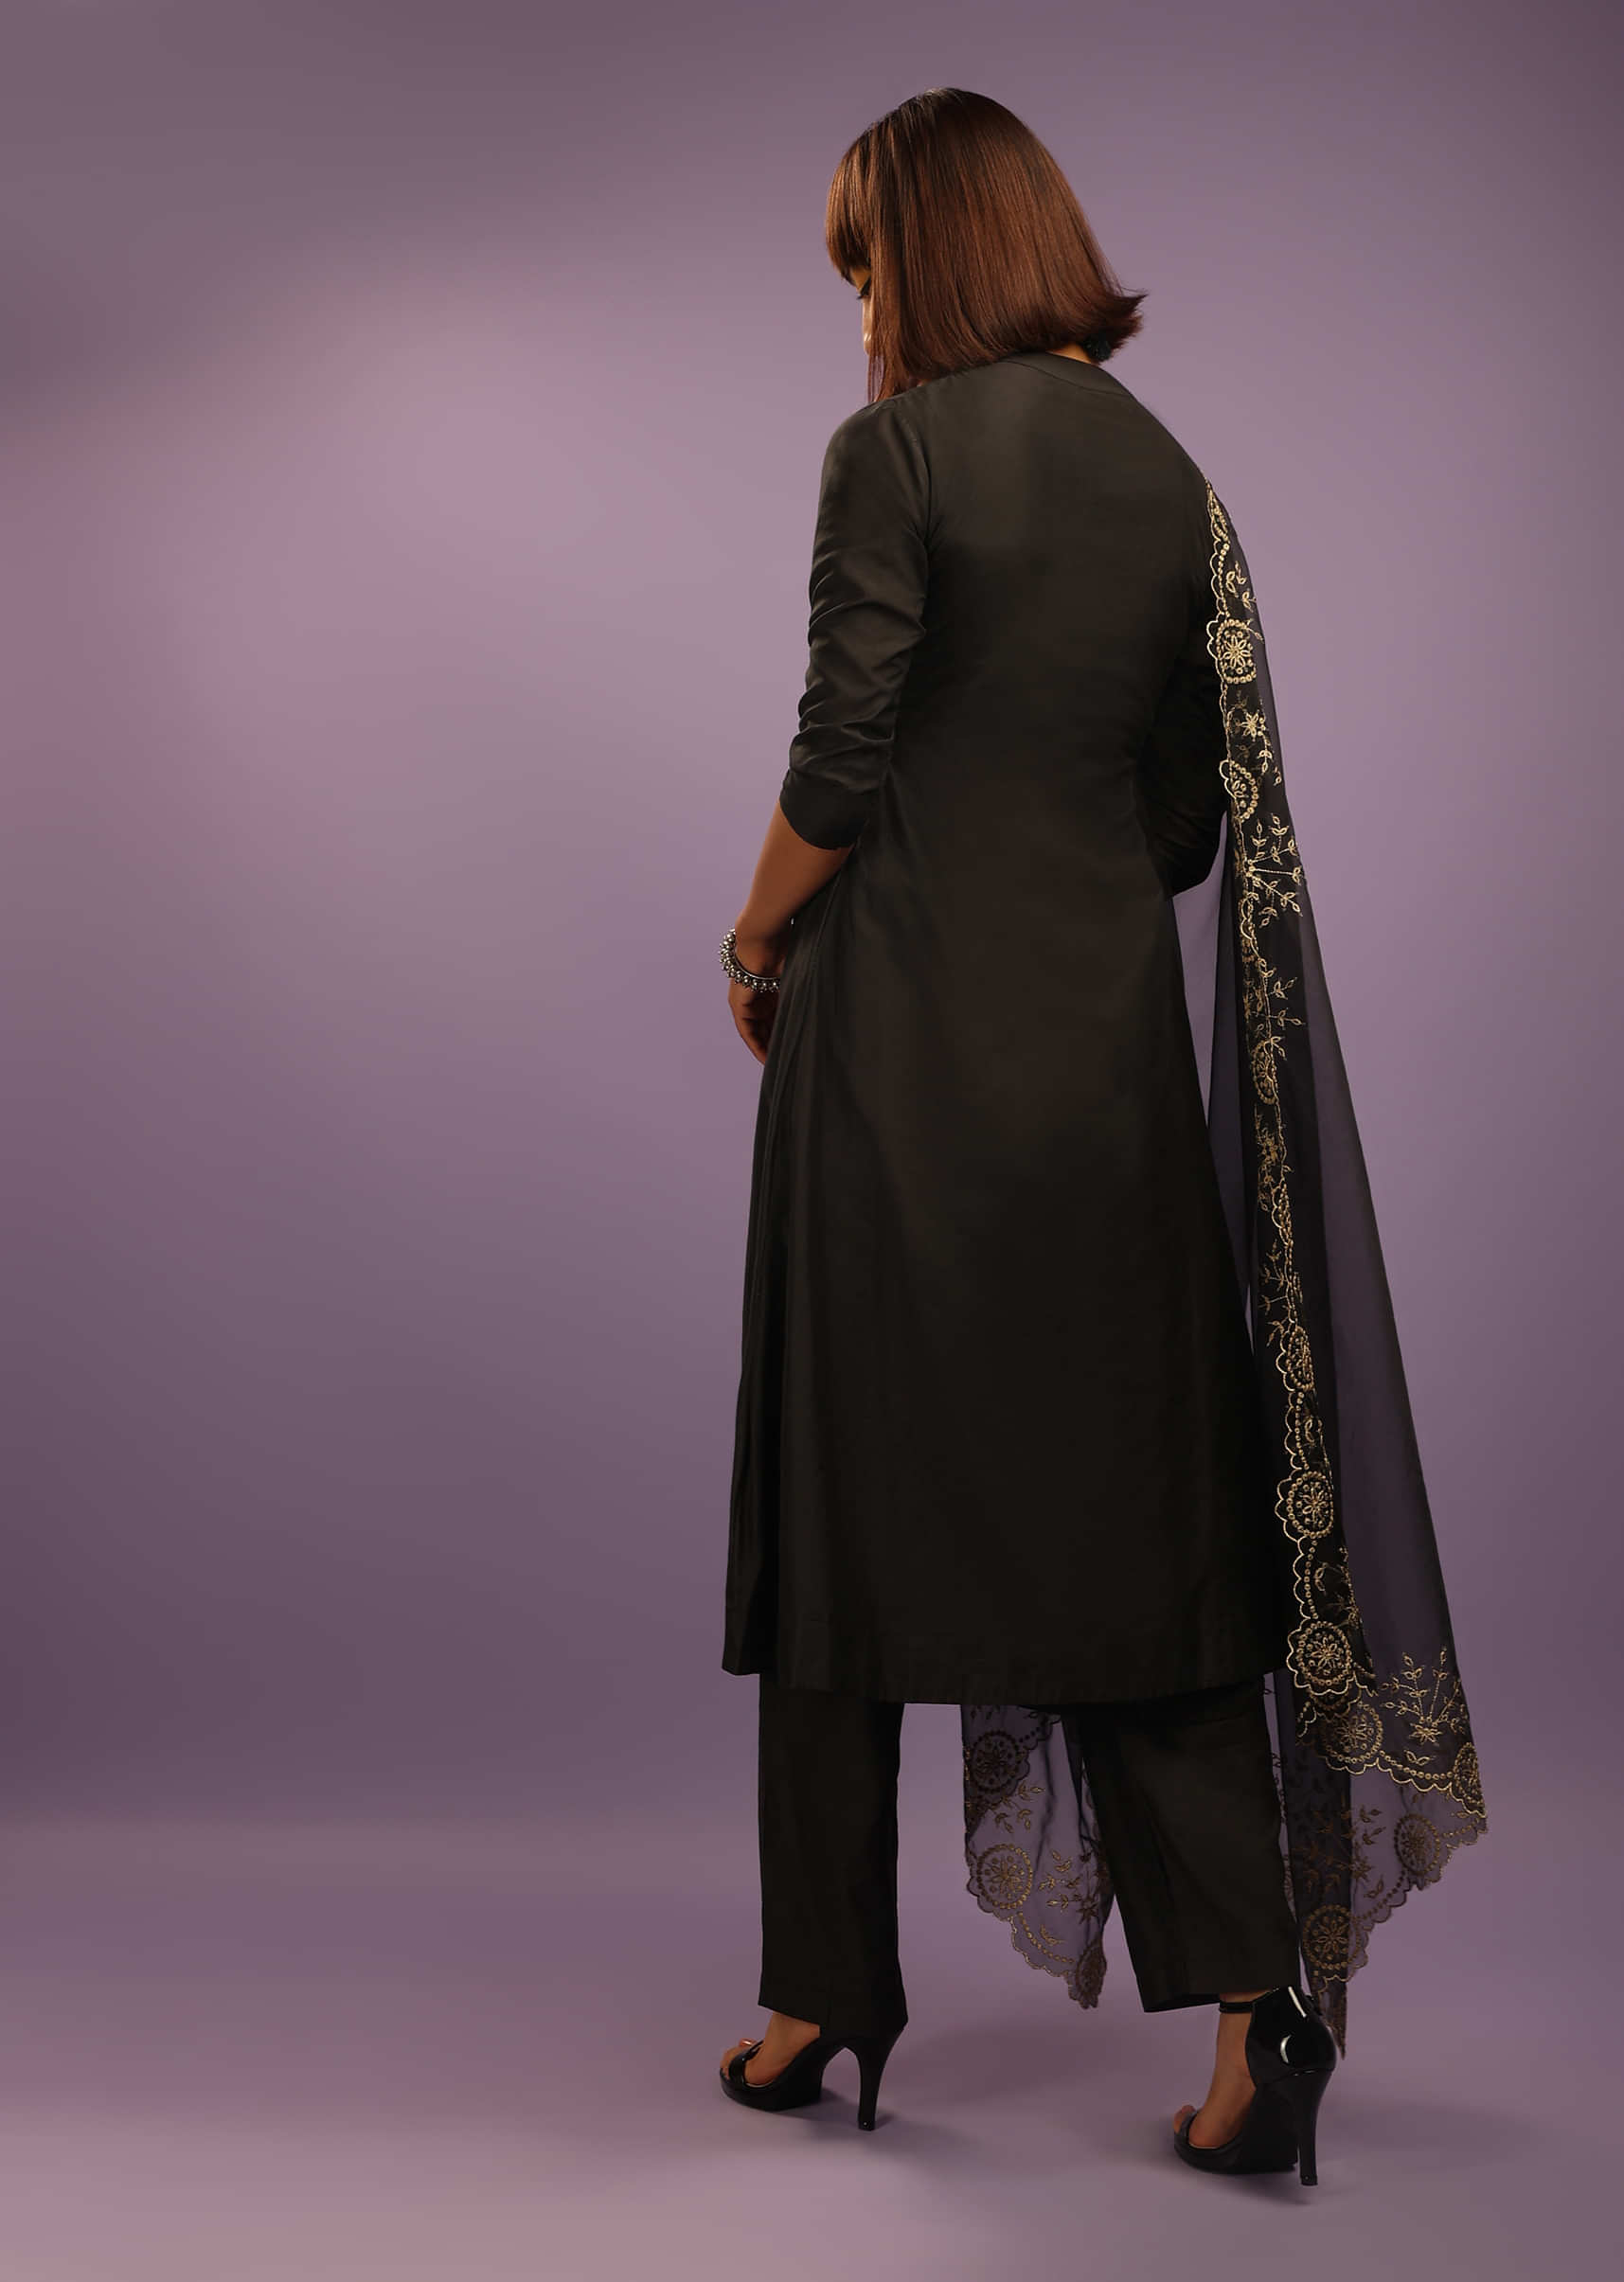 Black A Line Suit In Chanderi Cotton With Pin Tucks Detailing And A Zari Embroidered Organza Dupatta  